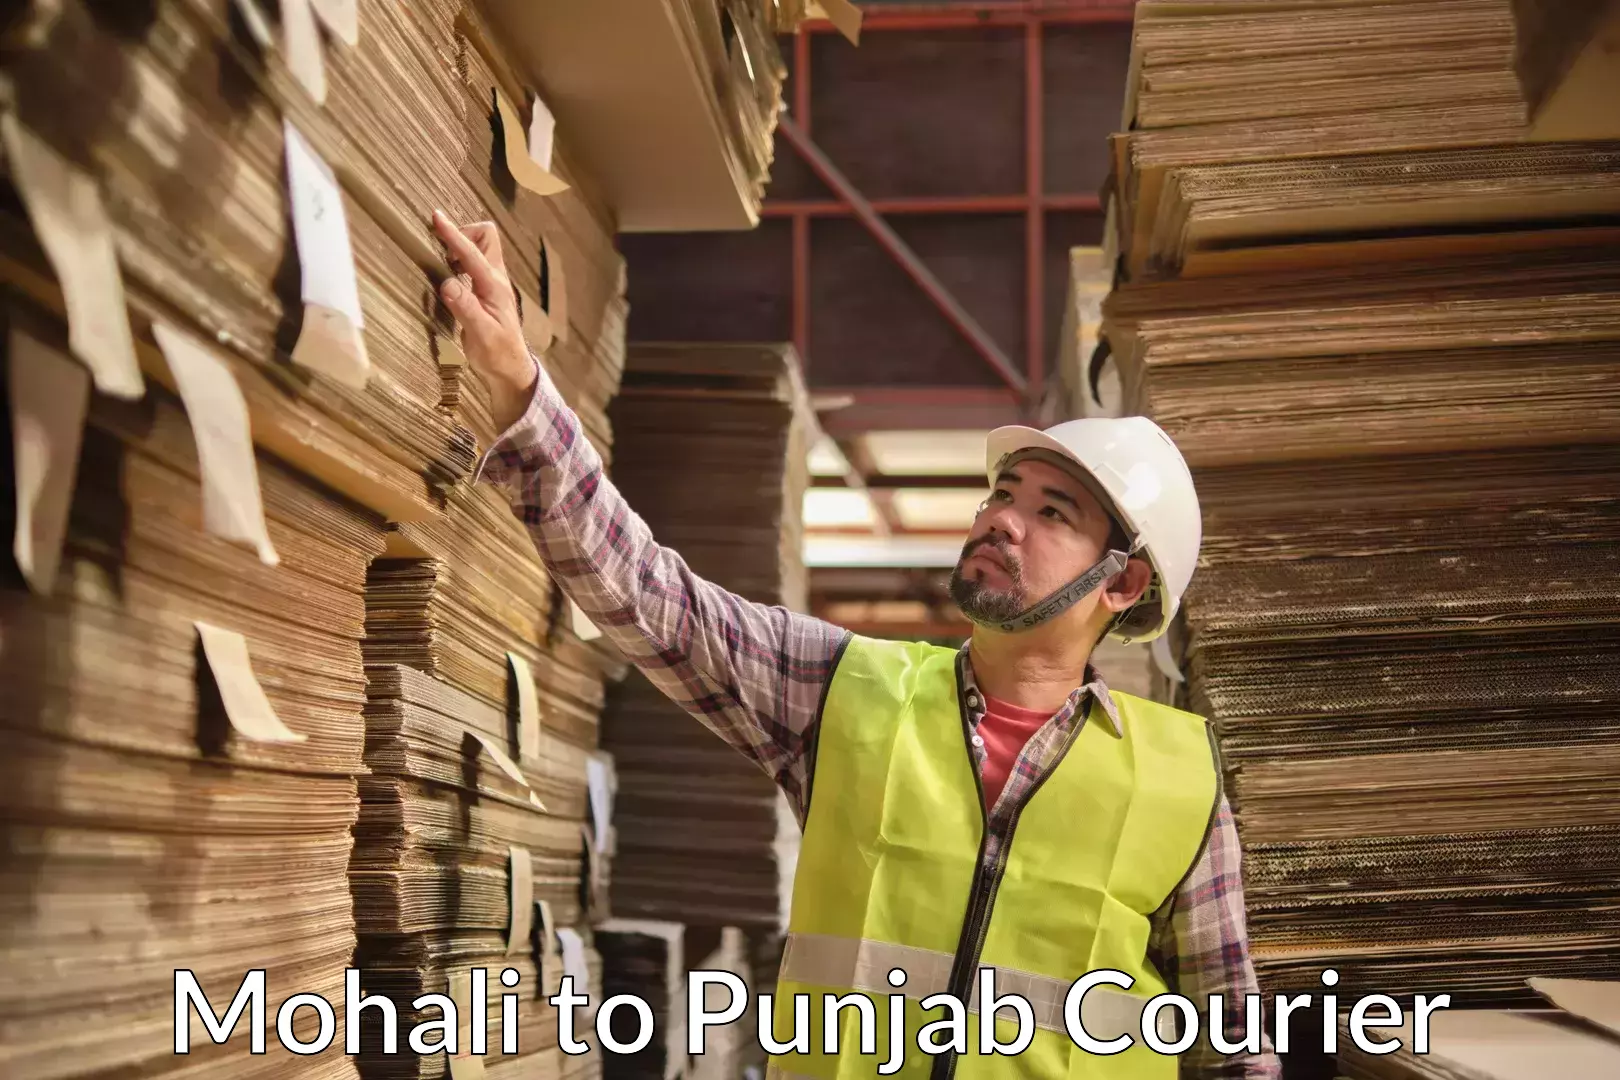 Furniture delivery service Mohali to Punjab